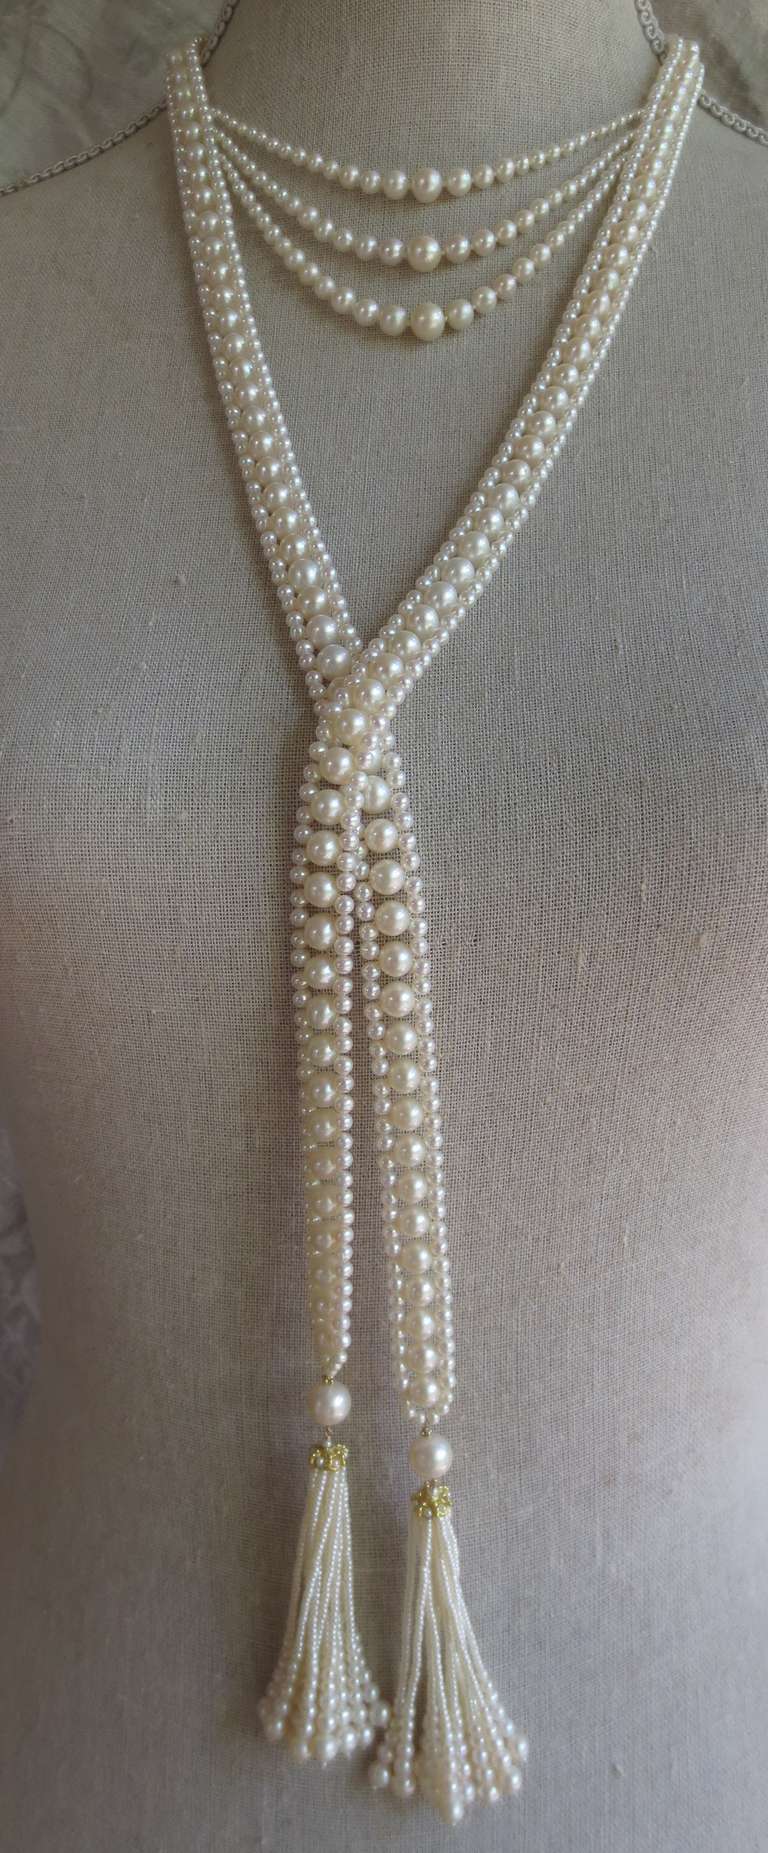 Unique, intricately woven handmade rope sautoir made of 6.5mm and 2.5mm white cultured pearls. Tassels are made of pearl, 14k gold rondelle and graduated pearls. Each tassel is composed of 12 strands of pearls. Sautoir measures 45